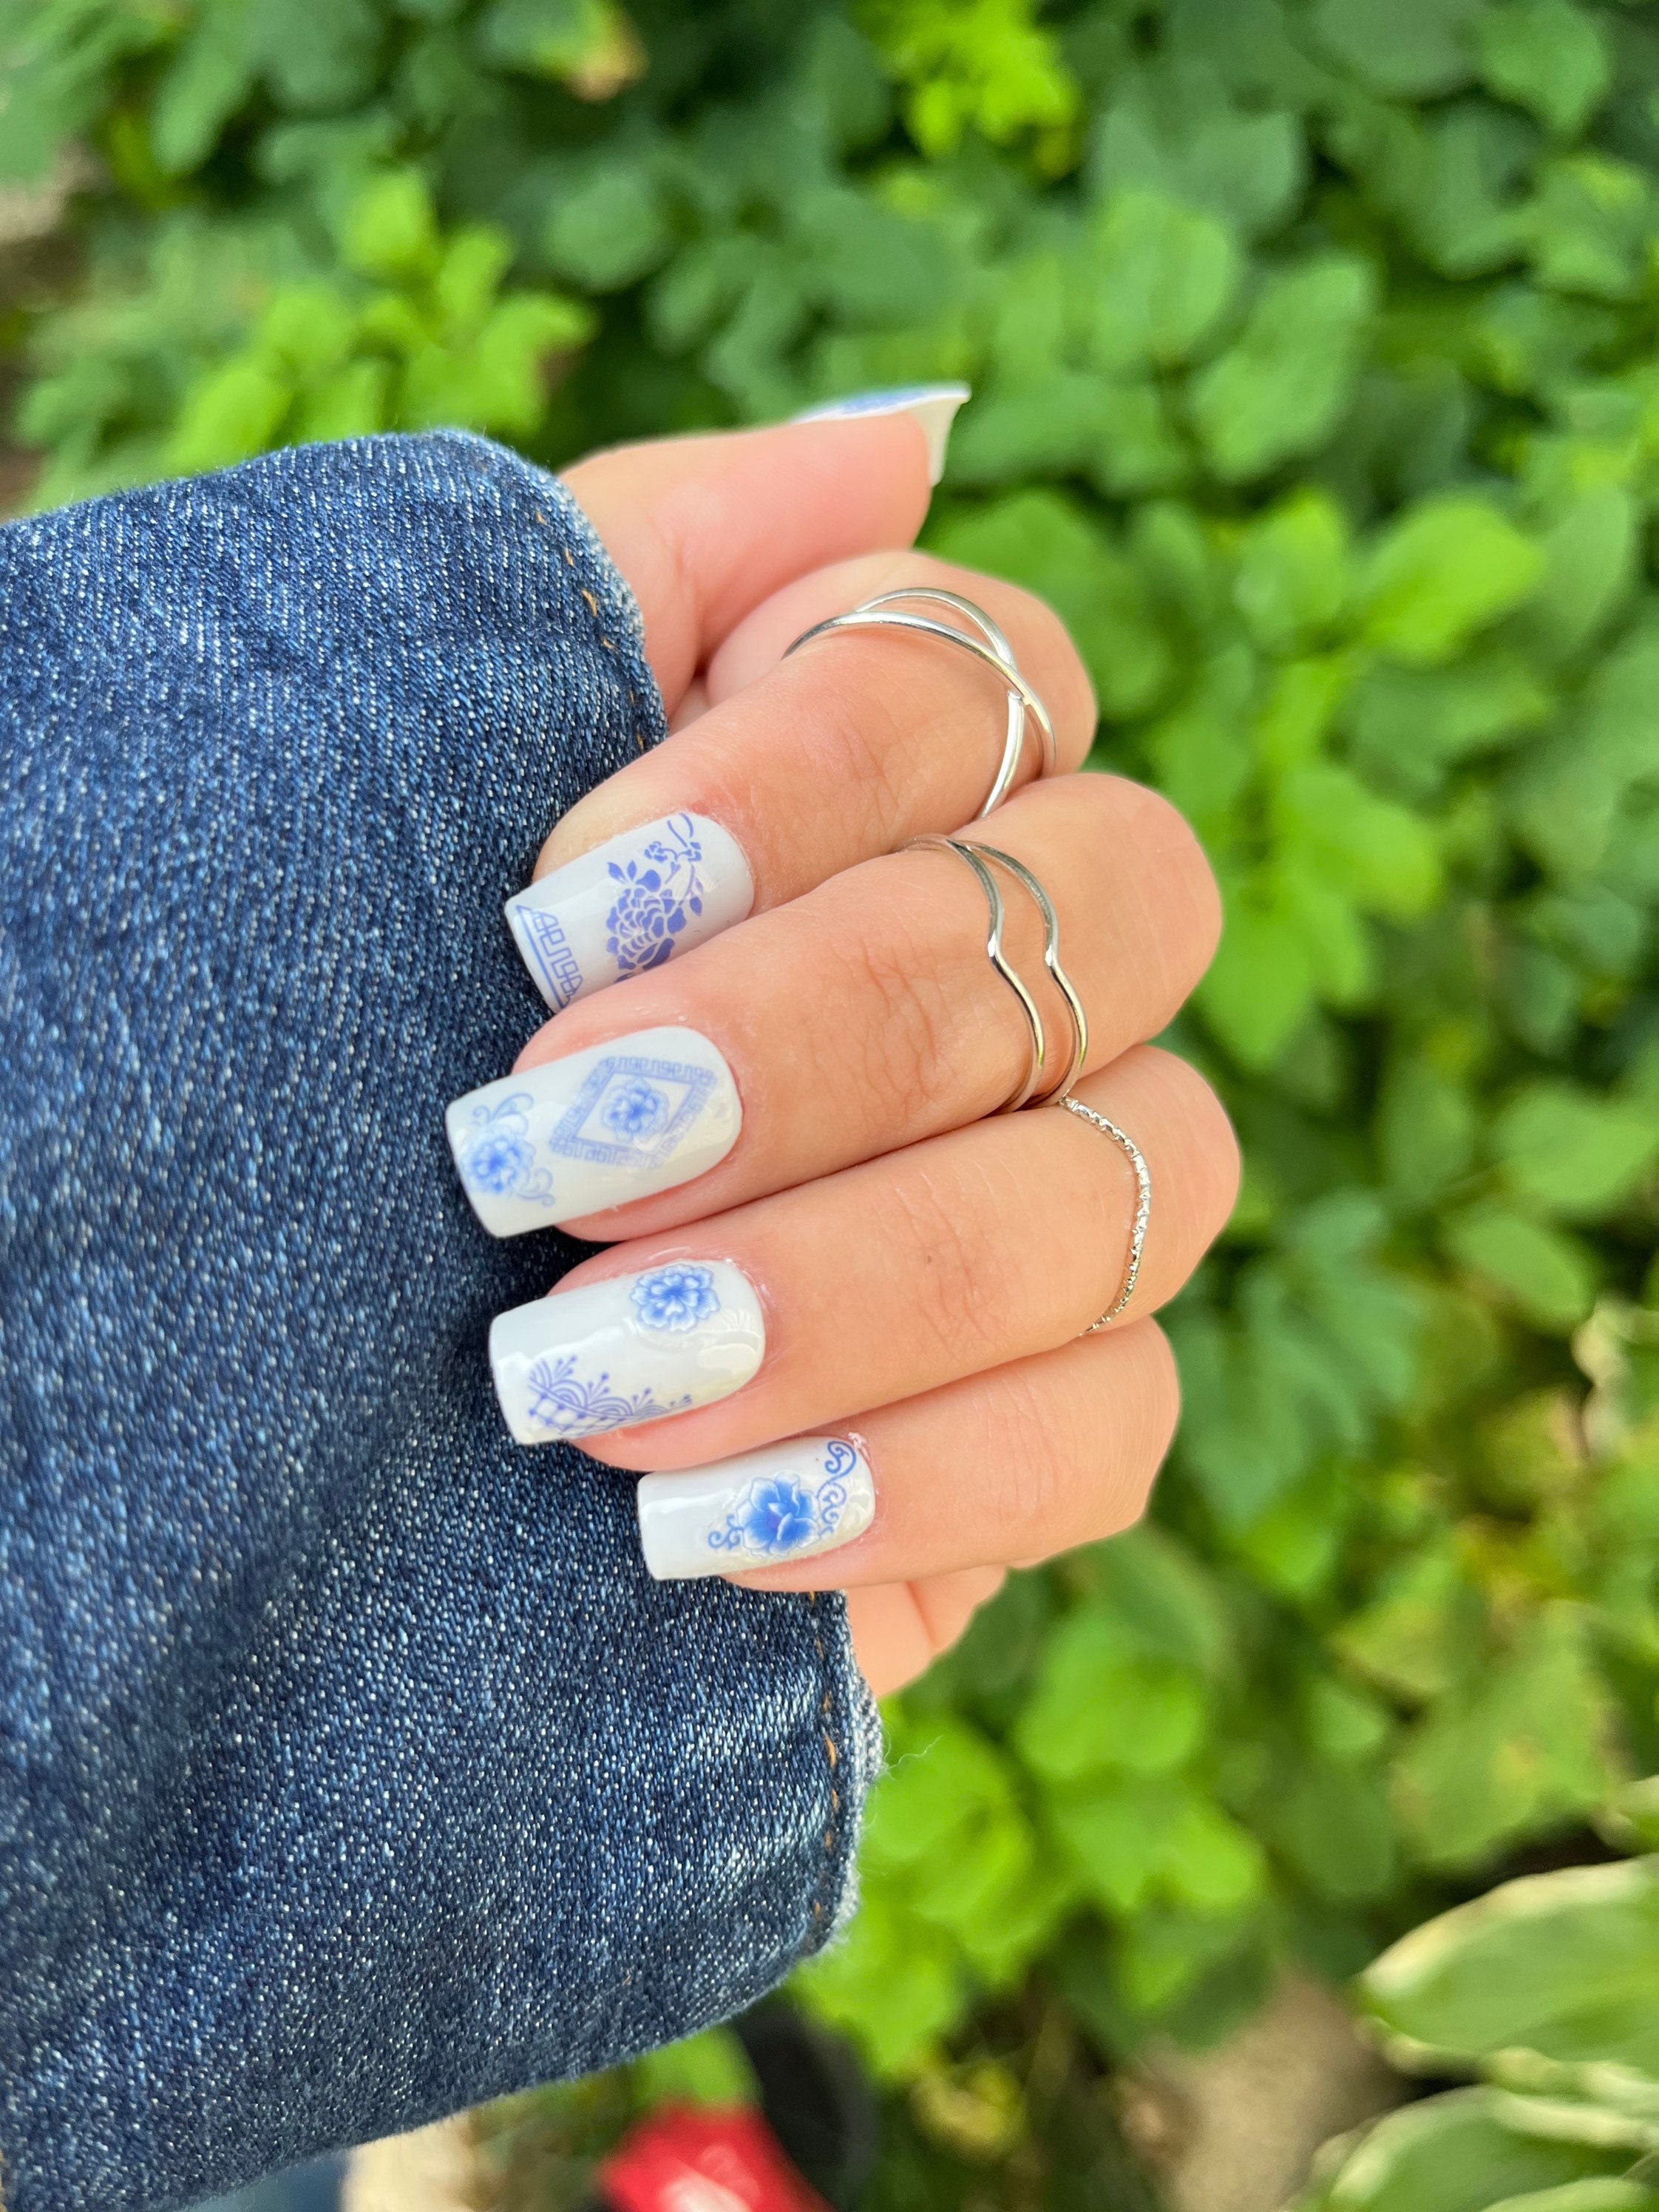 Manicure Monday with Claire's Press On Nails! - Fancieland